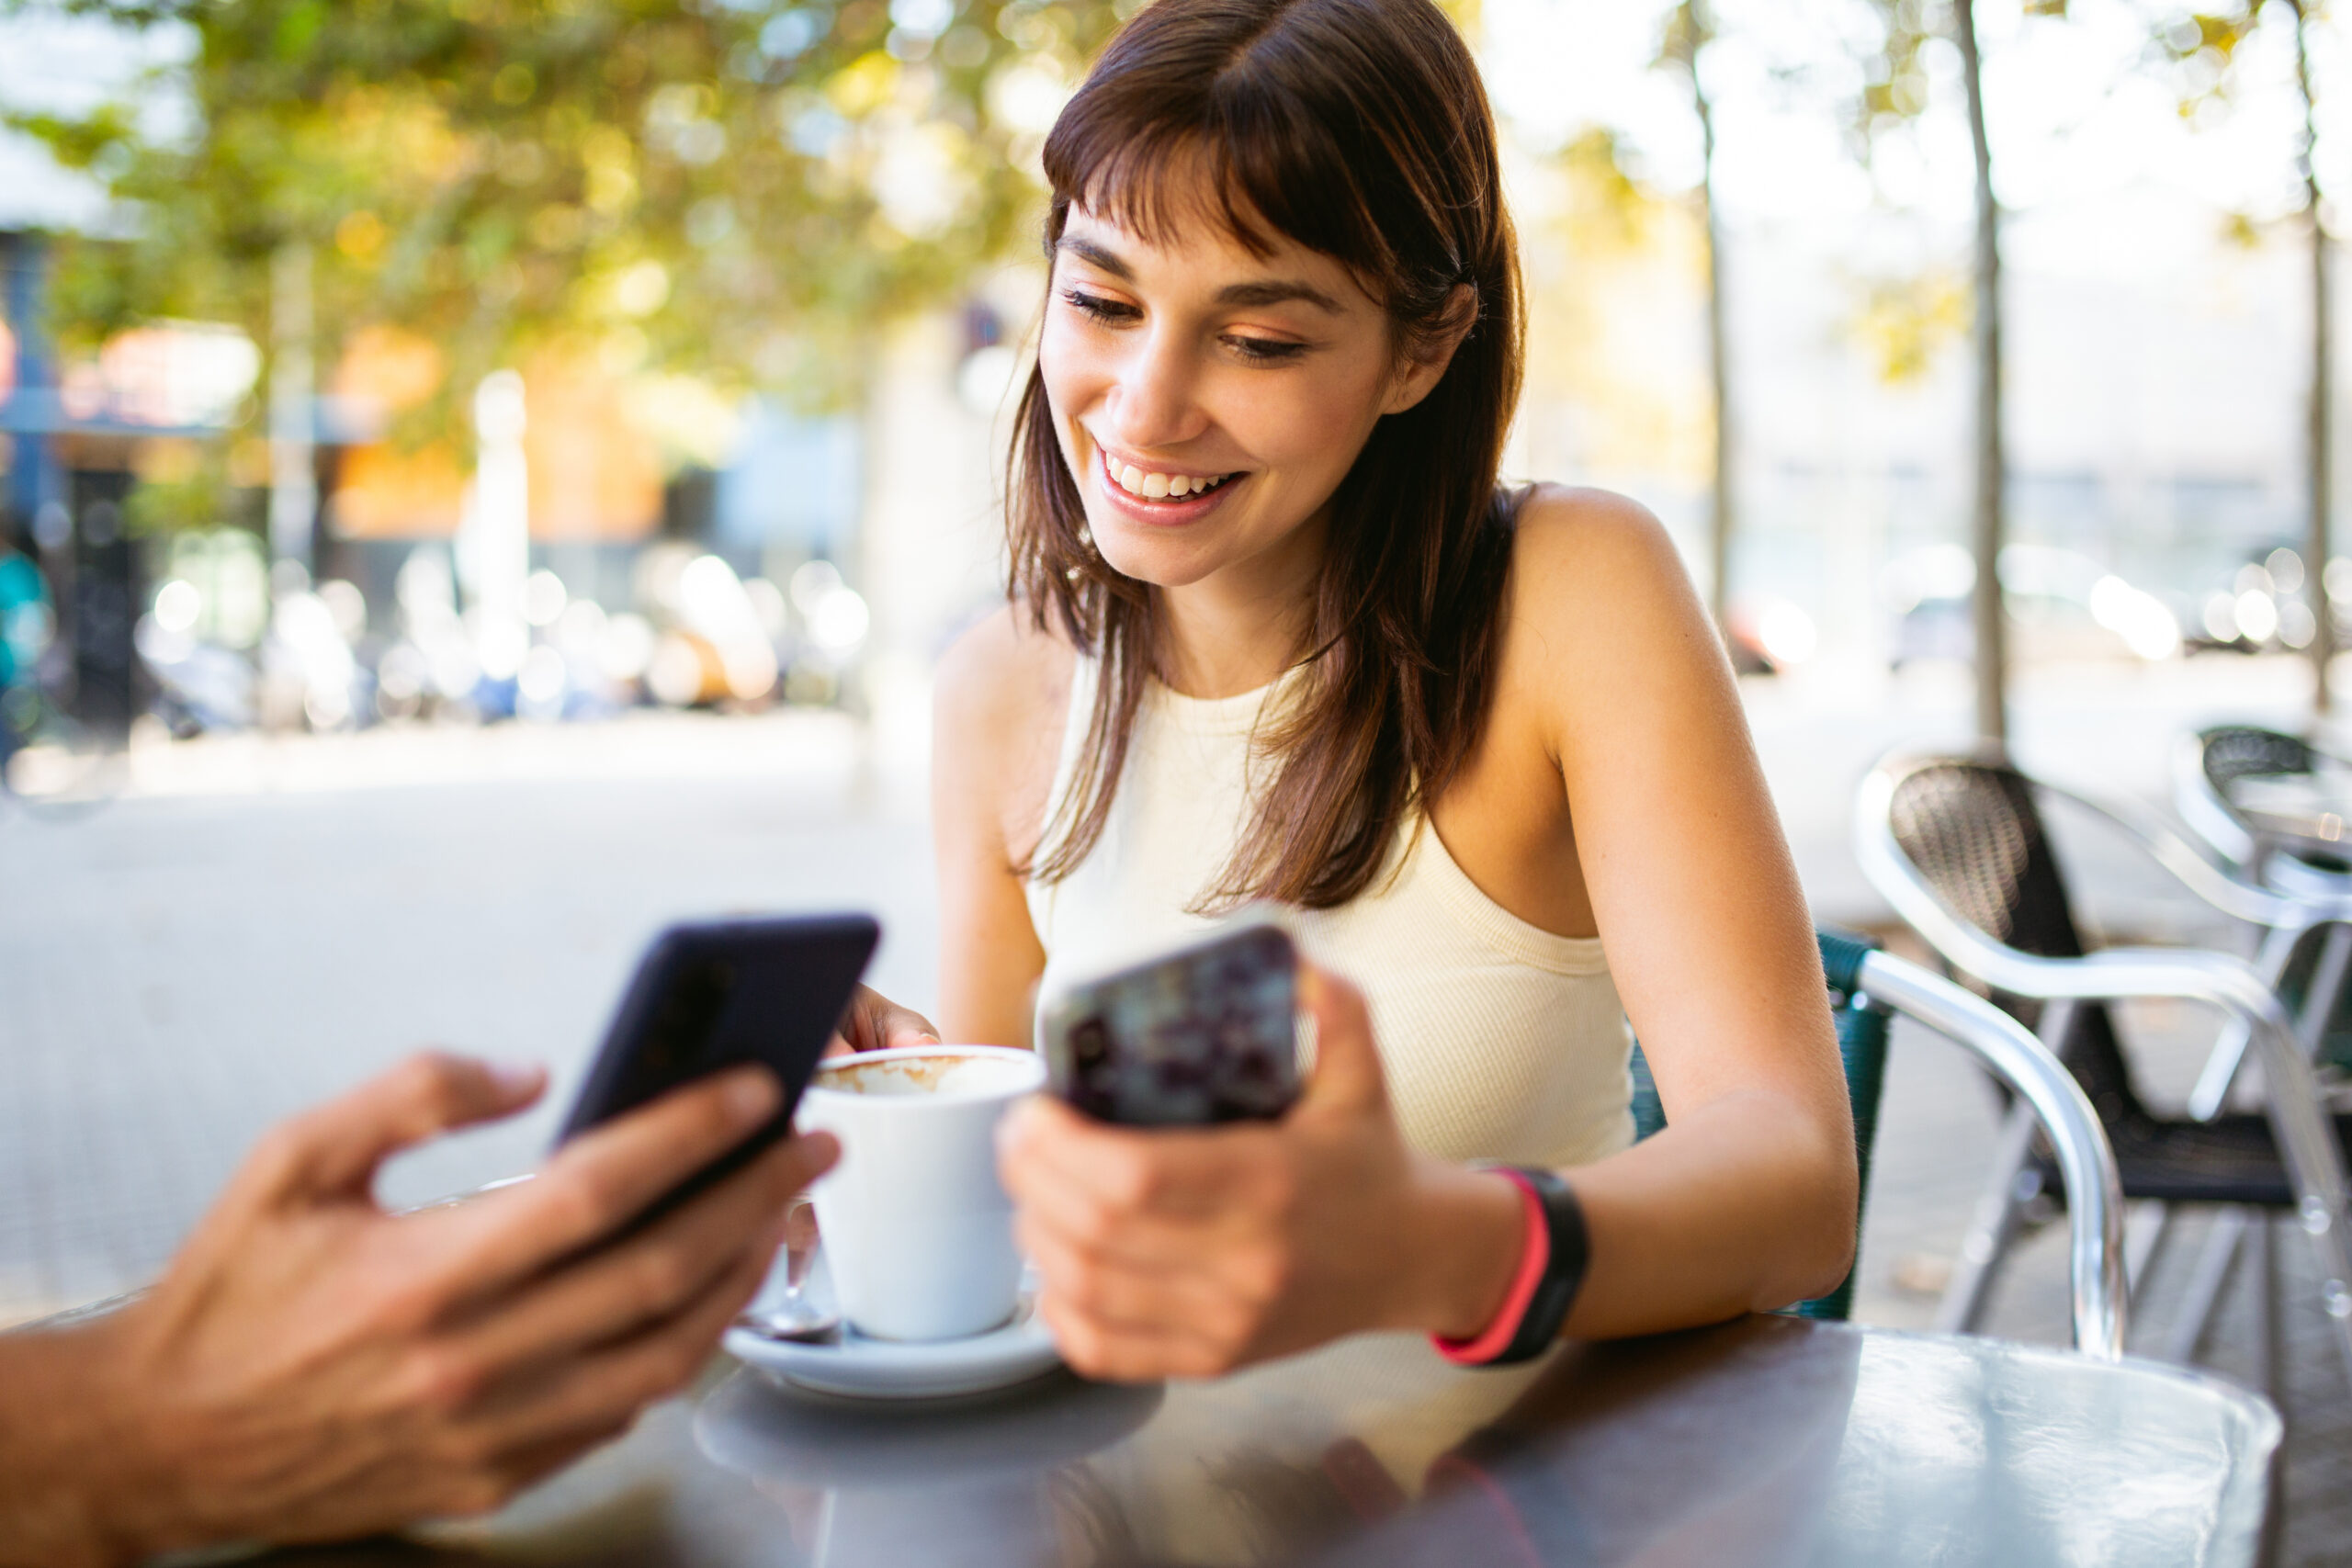 Smiling young woman using phone with friend at outdoor cafe